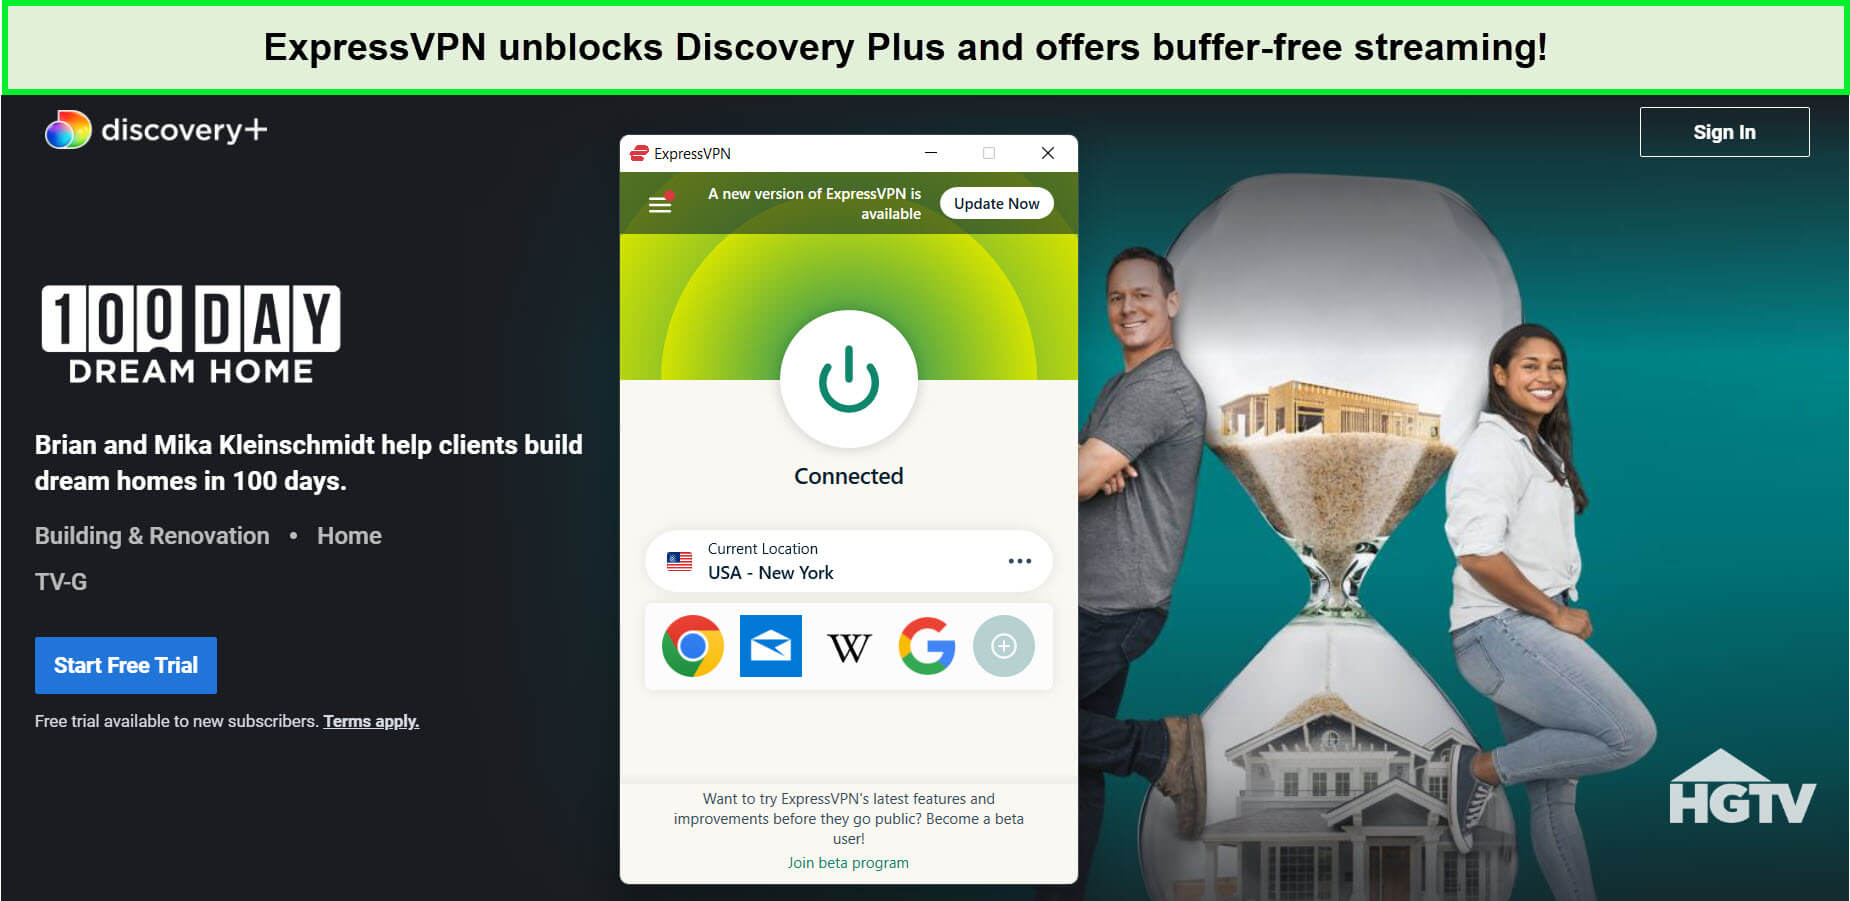 expressvpn-unblocks-hundred-day-dream-home-on-discovery-plus